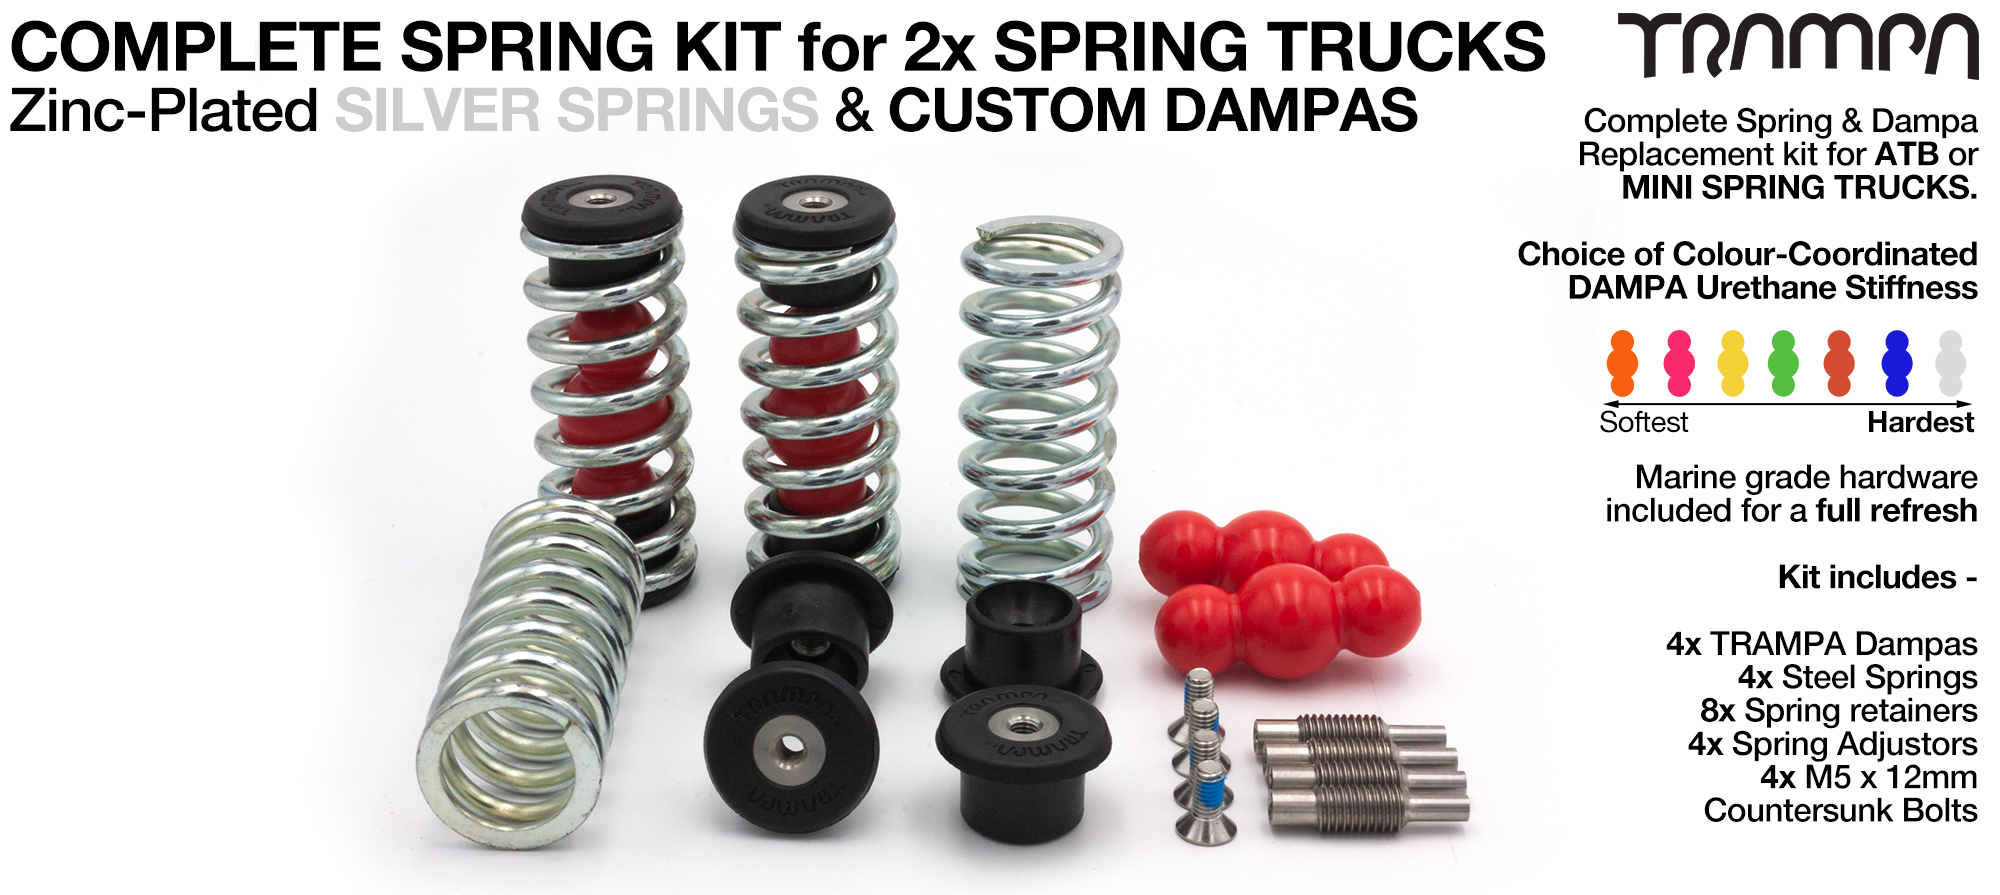 Complete Spring kit for 1x Board = 4x SILVER Springs 4x Dampa 8x Spring Retainers 4x Spring Adjuster & 4 M5x12mm Countersunk Bolt 